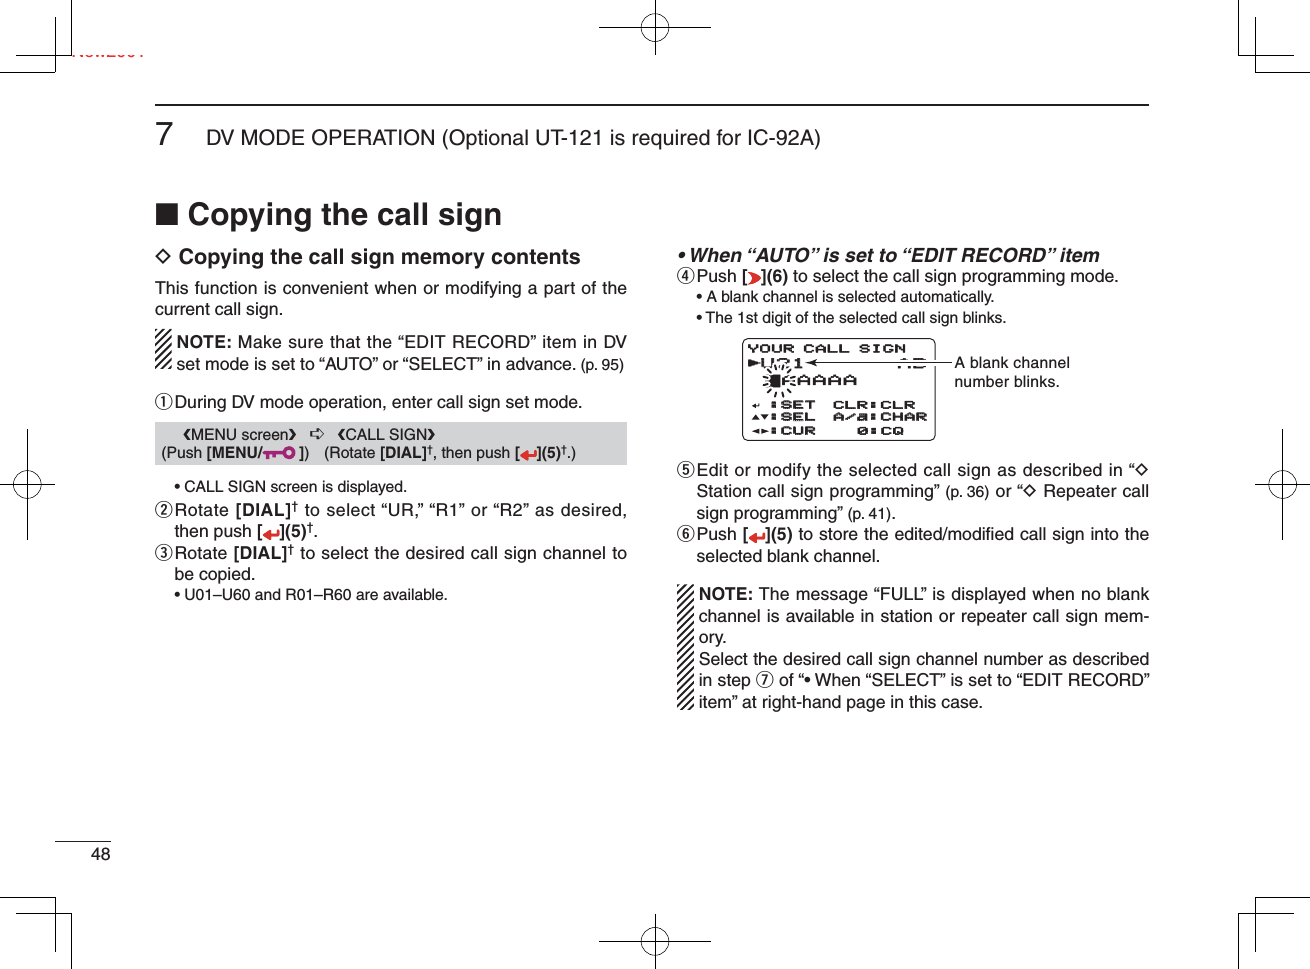 Ne487DV MODE OPERATION (Optional UT-121 is required for IC-92A)New2001■ Copying the call signD Copying the call sign memory contentsThis function is convenient when or modifying a part of the current call sign.  NOTE: Make sure that the “EDIT RECORD” item in DV set mode is set to “AUTO” or “SELECT” in advance. (p. 95)q  During DV mode operation, enter call sign set mode.  • CALL SIGN screen is displayed.w  Rotate [DIAL]† to select “UR,” “R1” or “R2” as desired, then push [](5)†.e  Rotate [DIAL]† to select the desired call sign channel to be copied.• U01–U60 and R01–R60 are available.• When “AUTO” is set to “EDIT RECORD” itemr Push  [ ](6) to select the call sign programming mode.  • A blank channel is selected automatically.  • The 1st digit of the selected call sign blinks.t  Edit or modify the selected call sign as described in “D Station call sign programming” (p. 36) or “D Repeater call sign programming” (p. 41).y  Push [](5) to store the edited/modiﬁ ed call sign into the selected blank channel.  NOTE: The message “FULL” is displayed when no blank channel is available in station or repeater call sign mem-ory.  Select the desired call sign channel number as described in step u of “• When “SELECT” is set to “EDIT RECORD” item” at right-hand page in this case.      ❮MENU screen❯   ➪   ❮CALL SIGN❯ (Push [MENU/ ]) (Rotate [DIAL]†, then push [ ](5)†.)U21U21 AB †AAAAA:SET:SET:SEL:SEL:CUR:CURCLR:CLRA/a:CHARA/a:CHAR0:CQYOUR CALL SIGNrA blank channelnumber blinks.